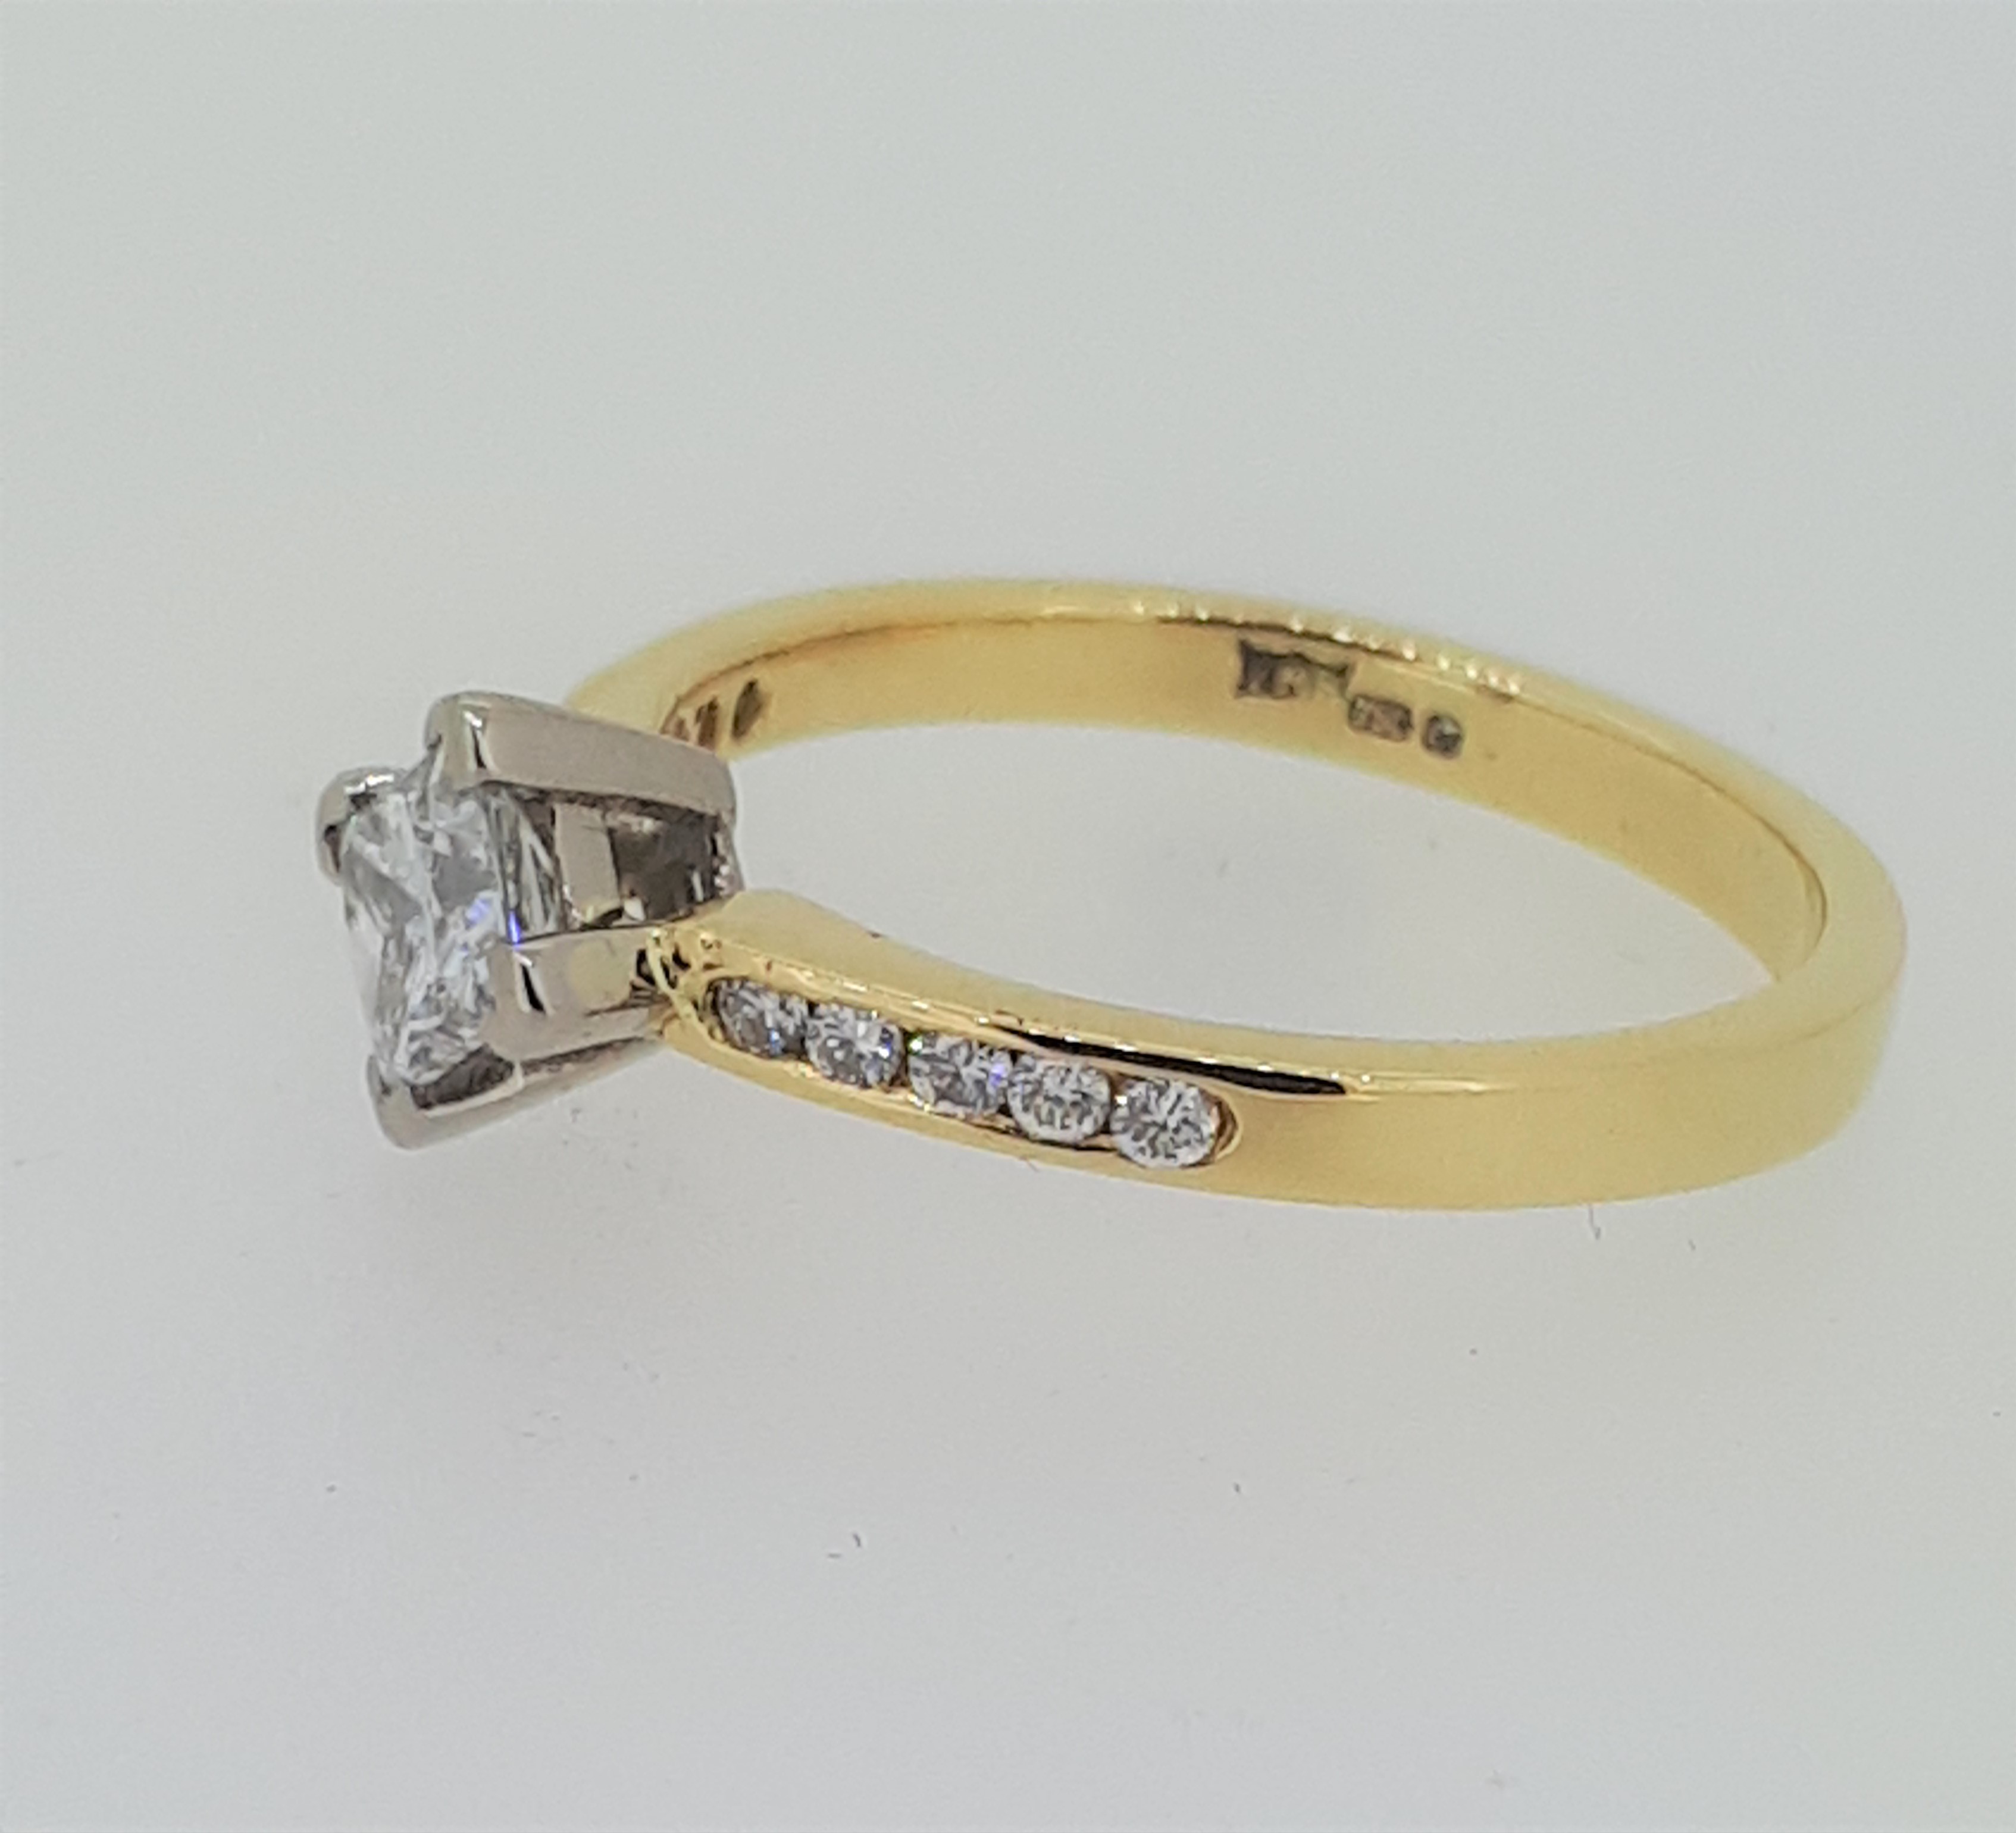 18ct (750) Yellow Gold Princess Cut 0.5ct Diamond Ring with Diamond Shoulders - Image 6 of 10